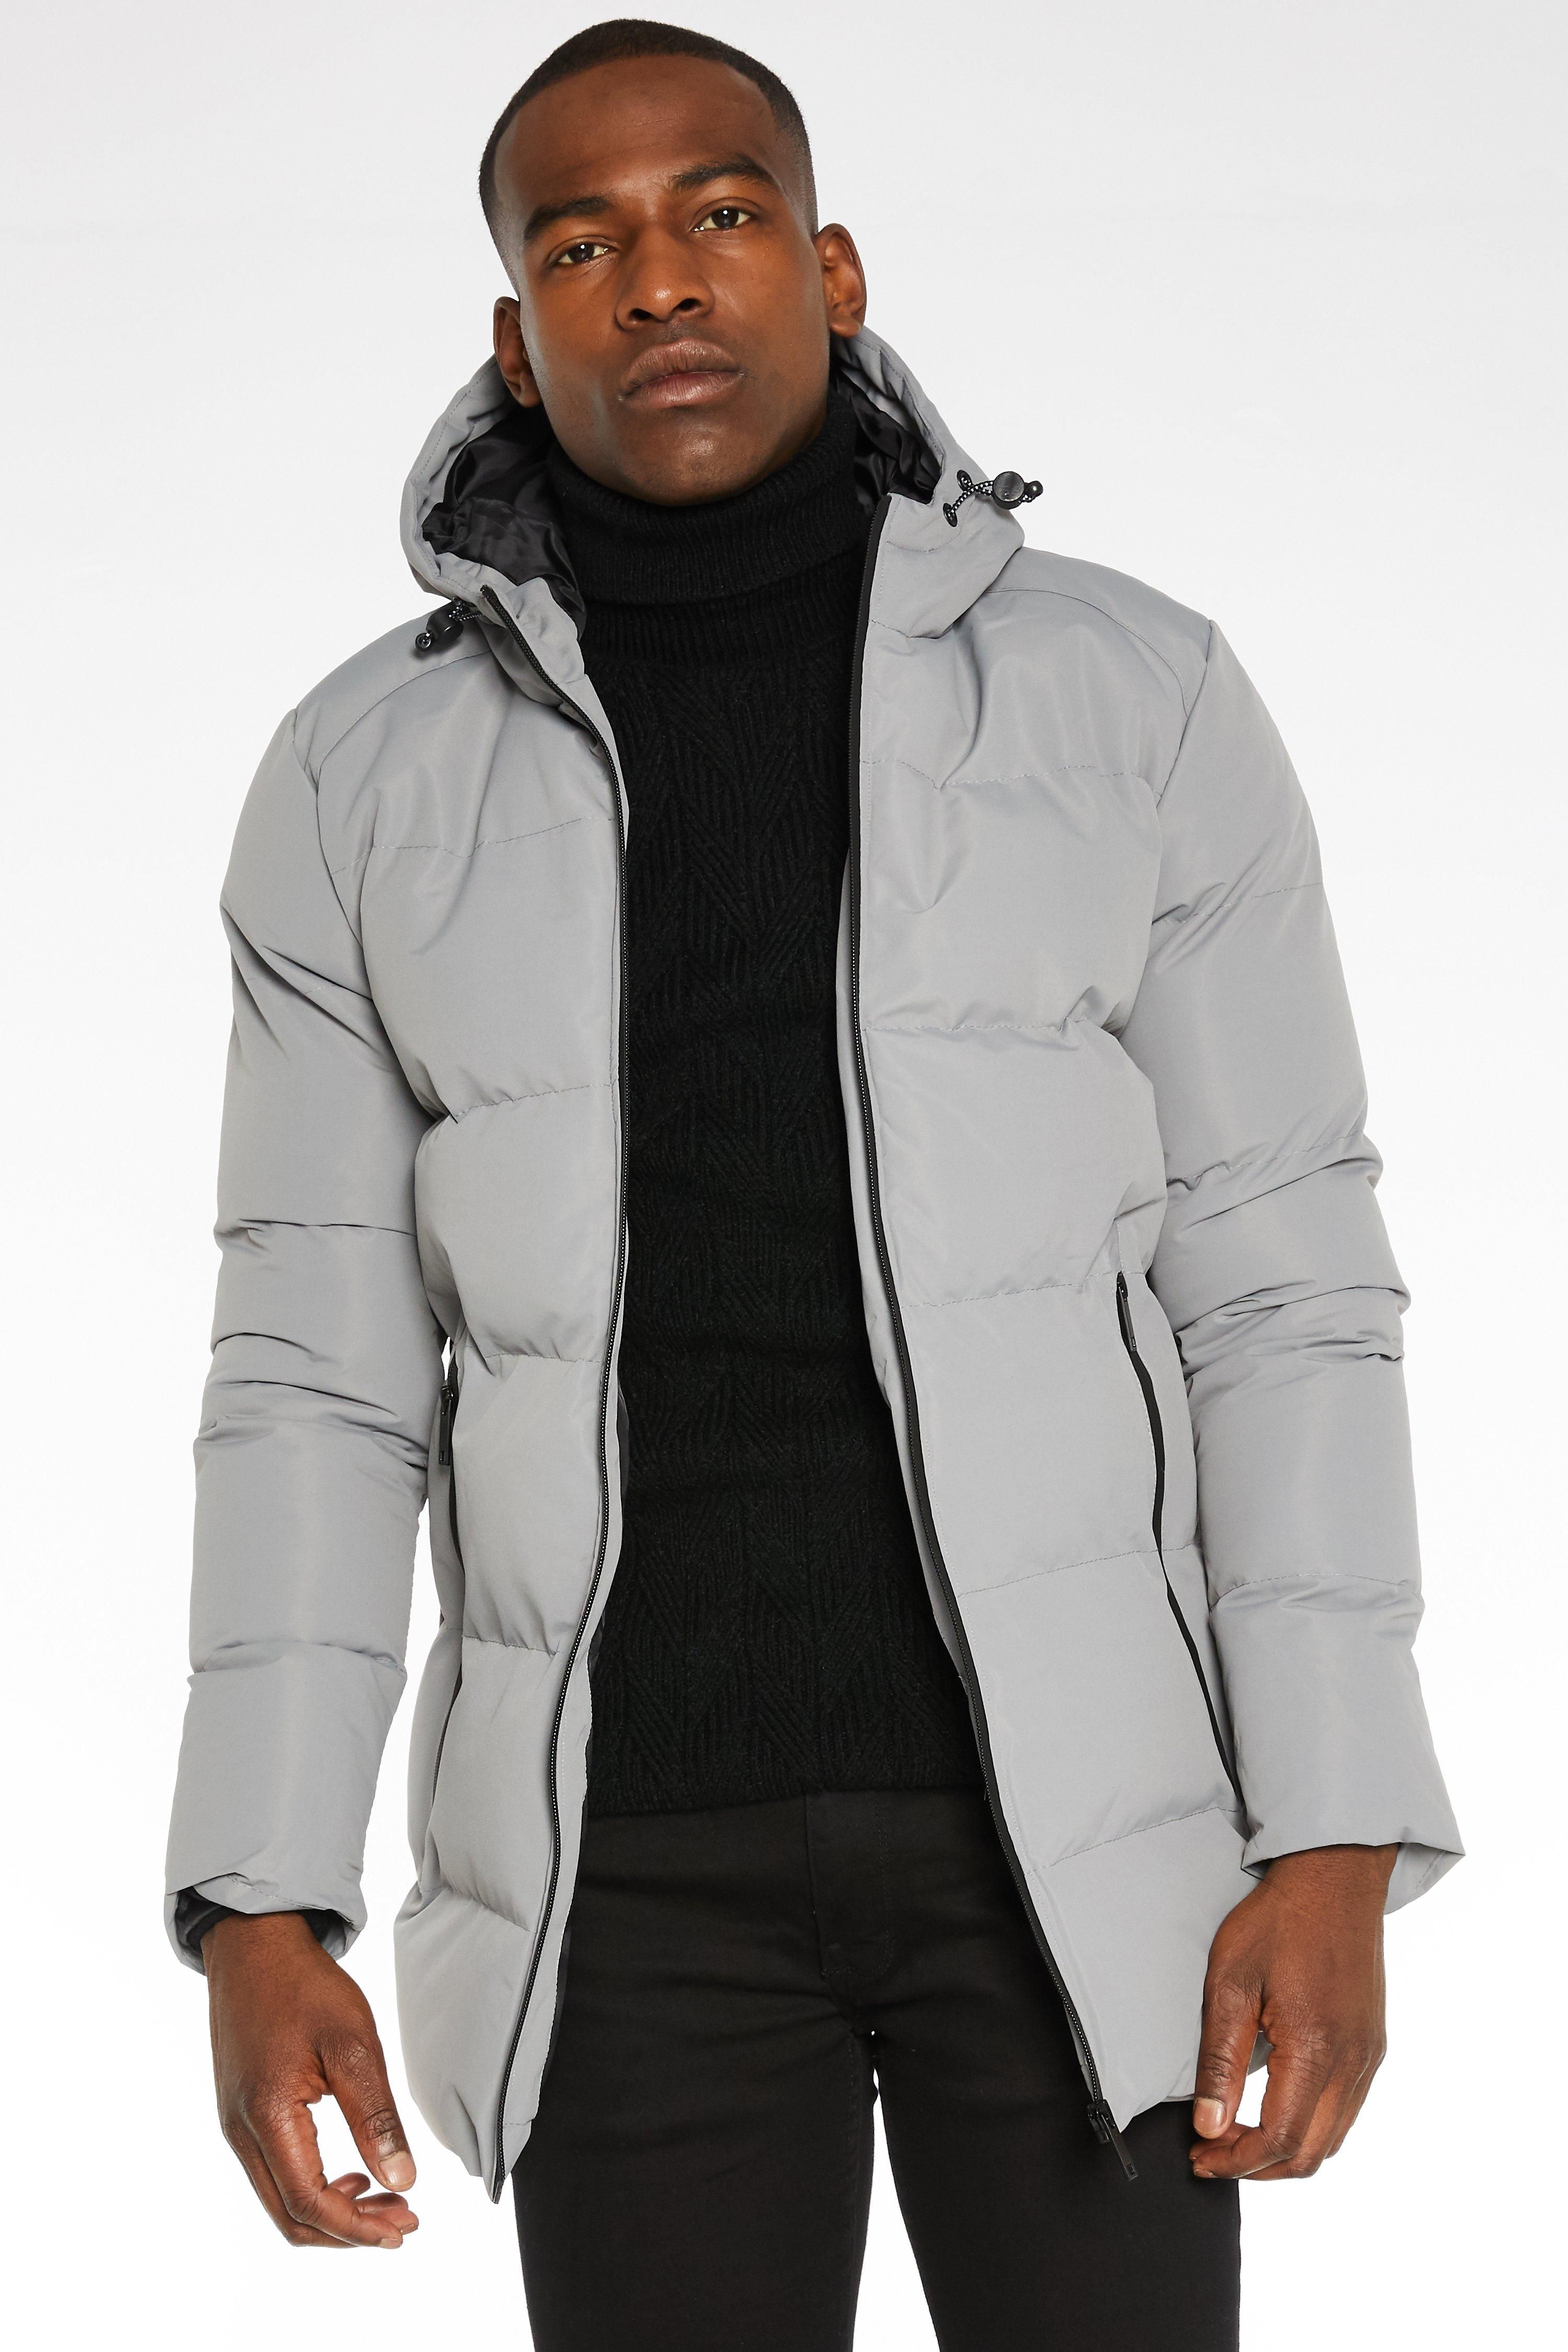 Parka Jacket  	Matte Finish  	Hooded with Draw-cord  	Zip Through Fastening  	Fuctional Pockets  	Padded  	Internal Pockets